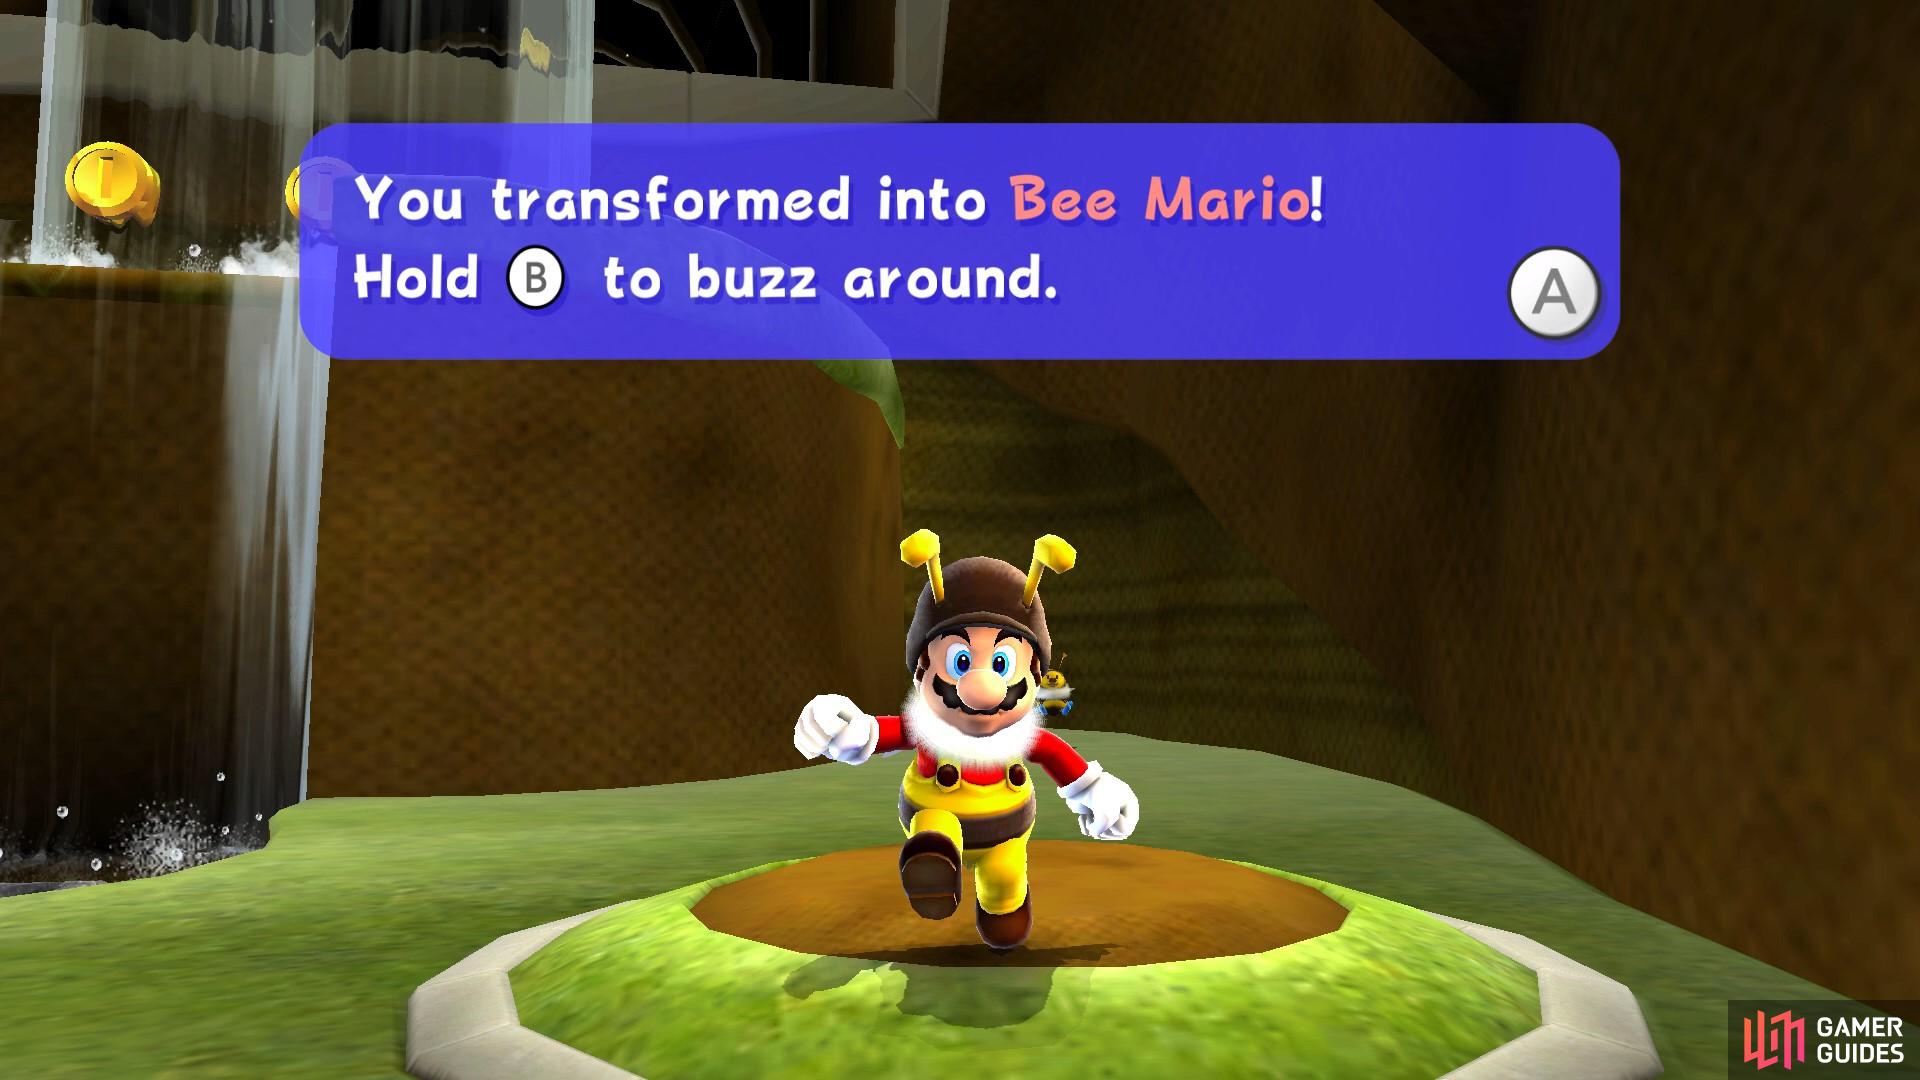 Bee Mario can fly for short amounts of time!